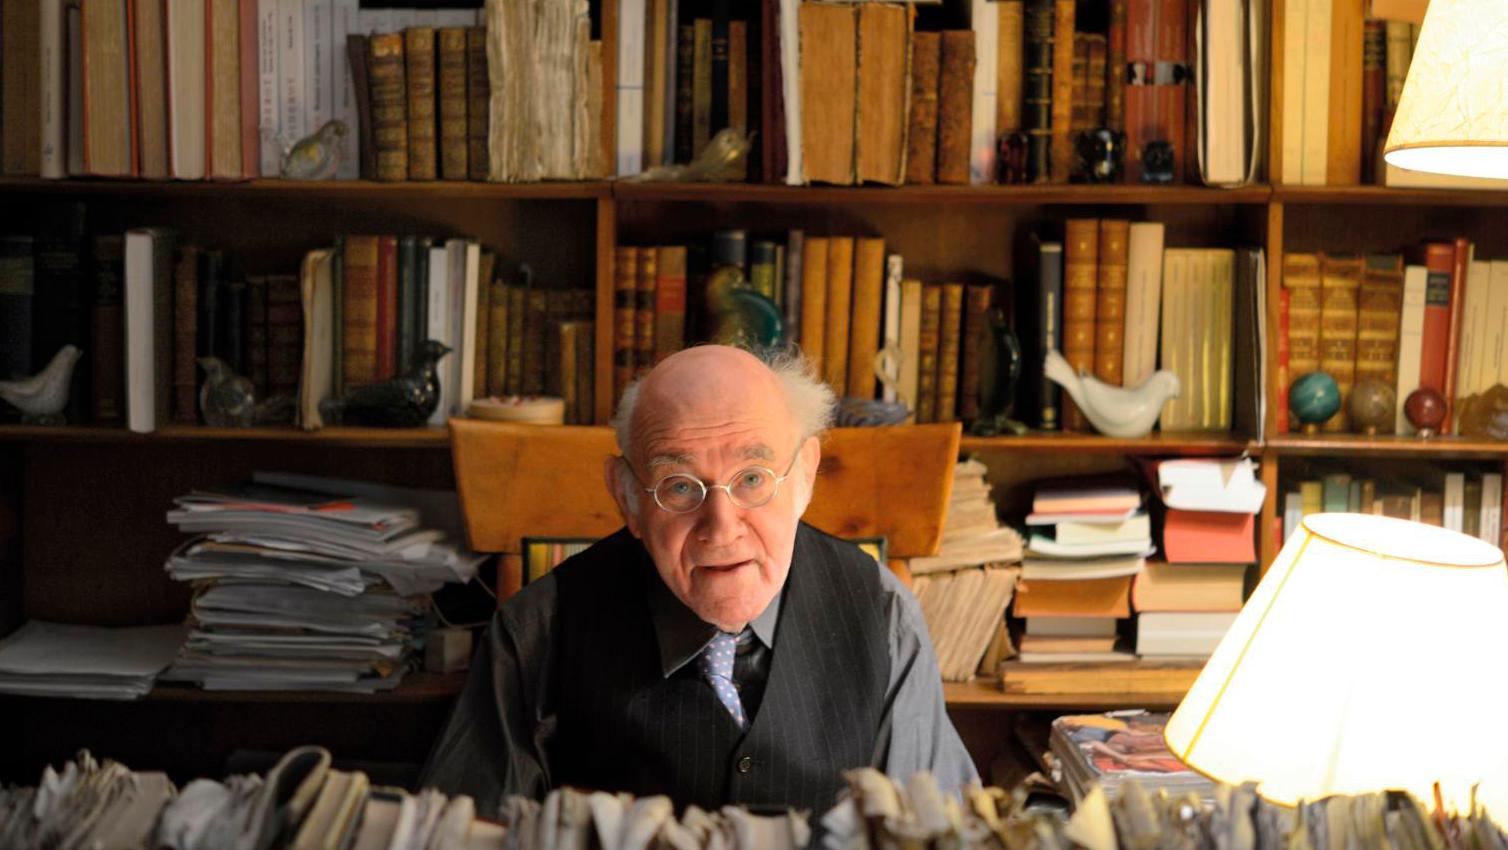 Pierre Rosenberg in the study of his Paris home© Suzanne Nagy Pierre Rosenberg the Collector